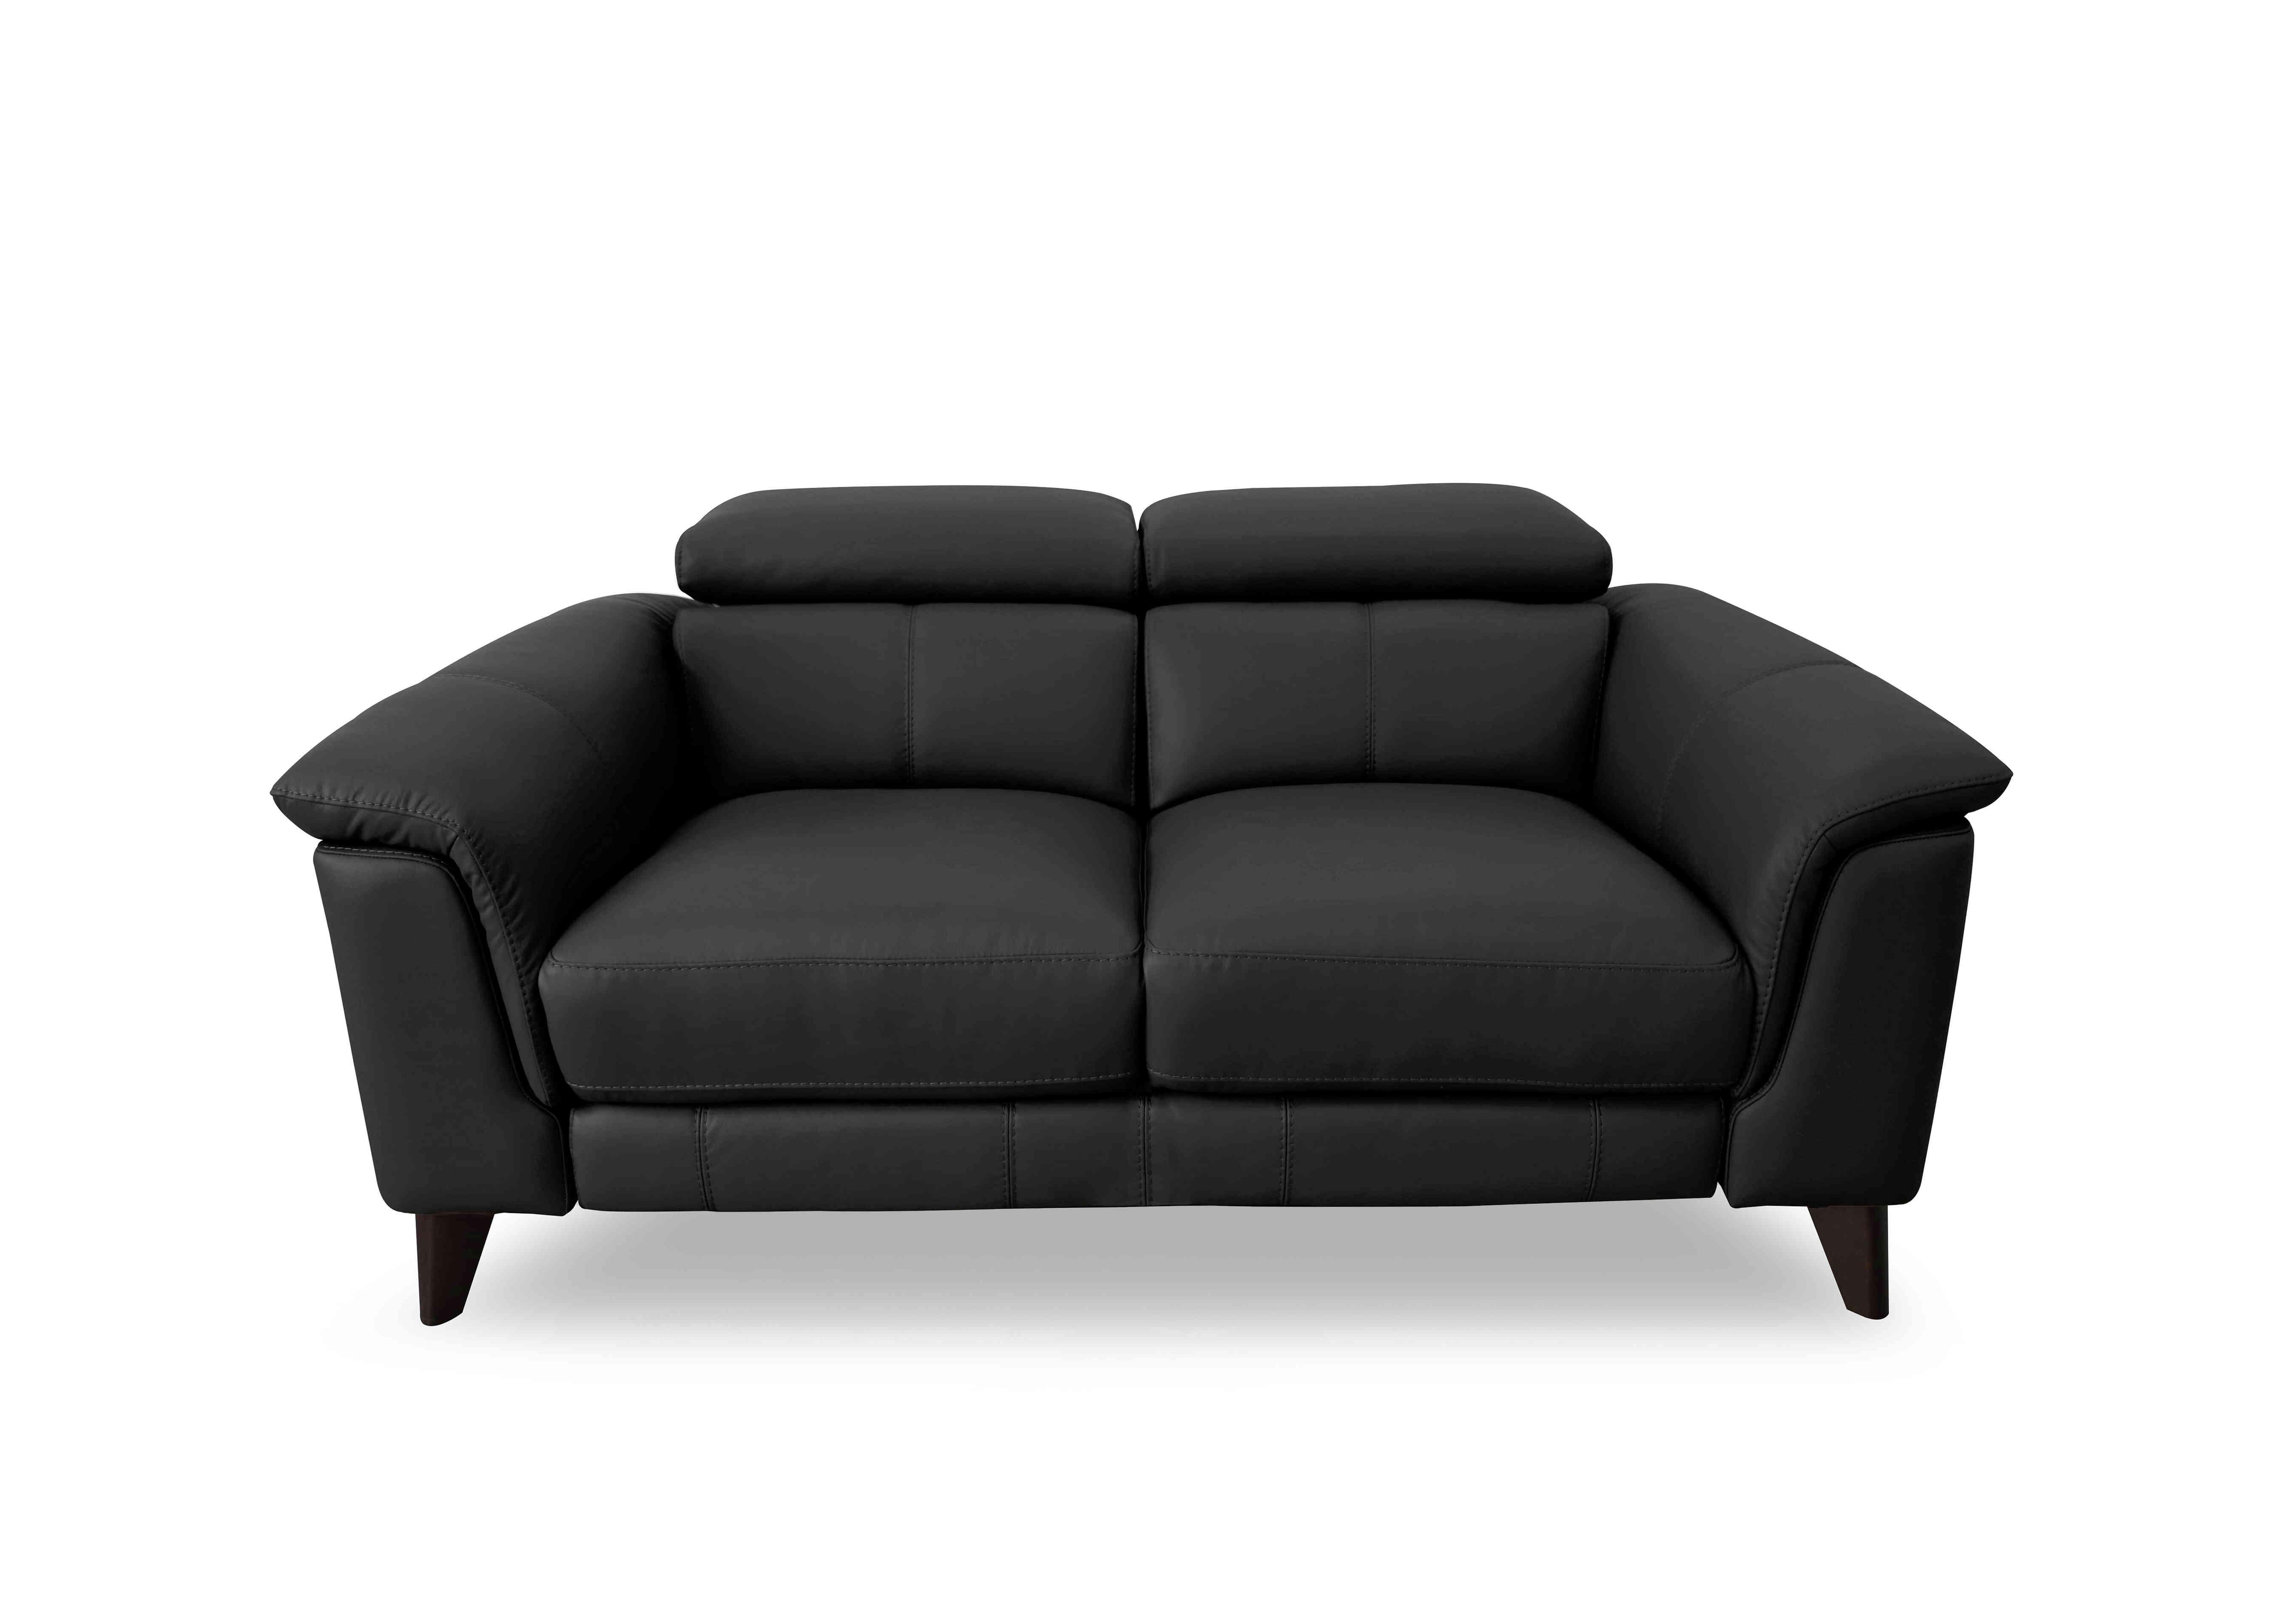 Wade 2 Seater Leather Sofa in Bv-3500 Classic Black on Furniture Village